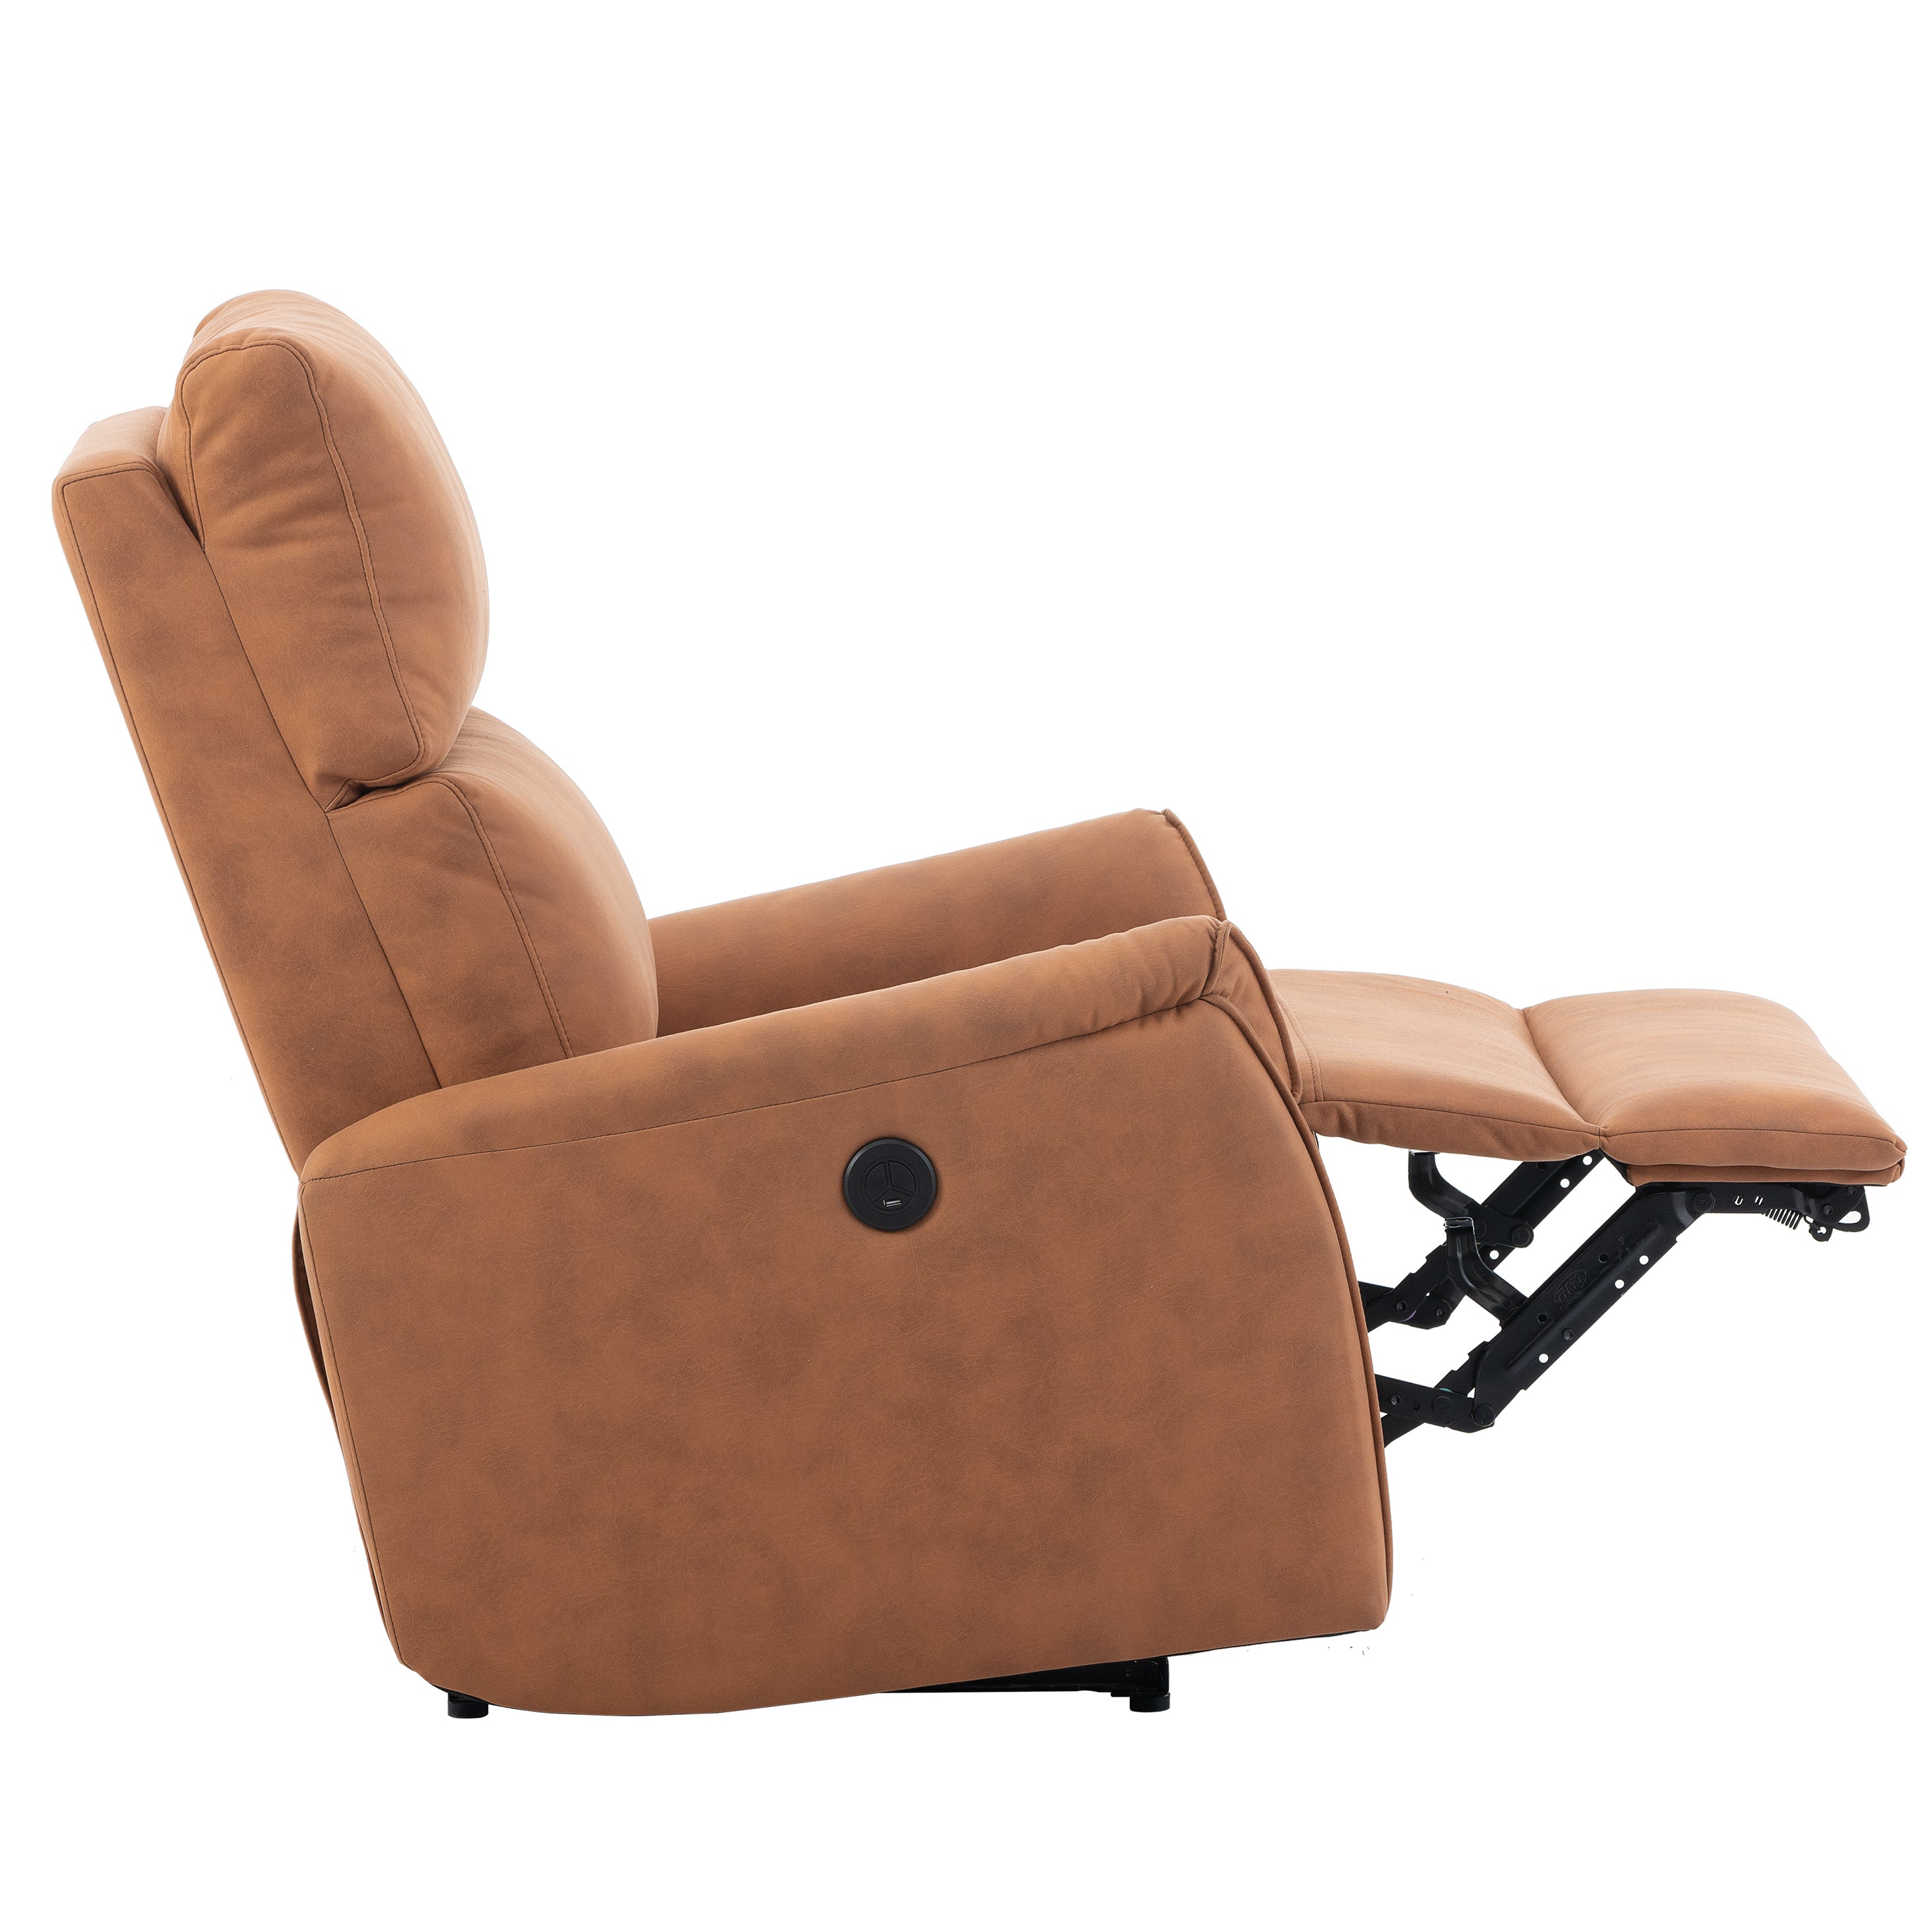 Electric Power Recliner Chair Fabric, Reclining Chair for Bedroom Living Room,Small Recliners Home Theater Seating, with USB Ports,Recliner for small spaces